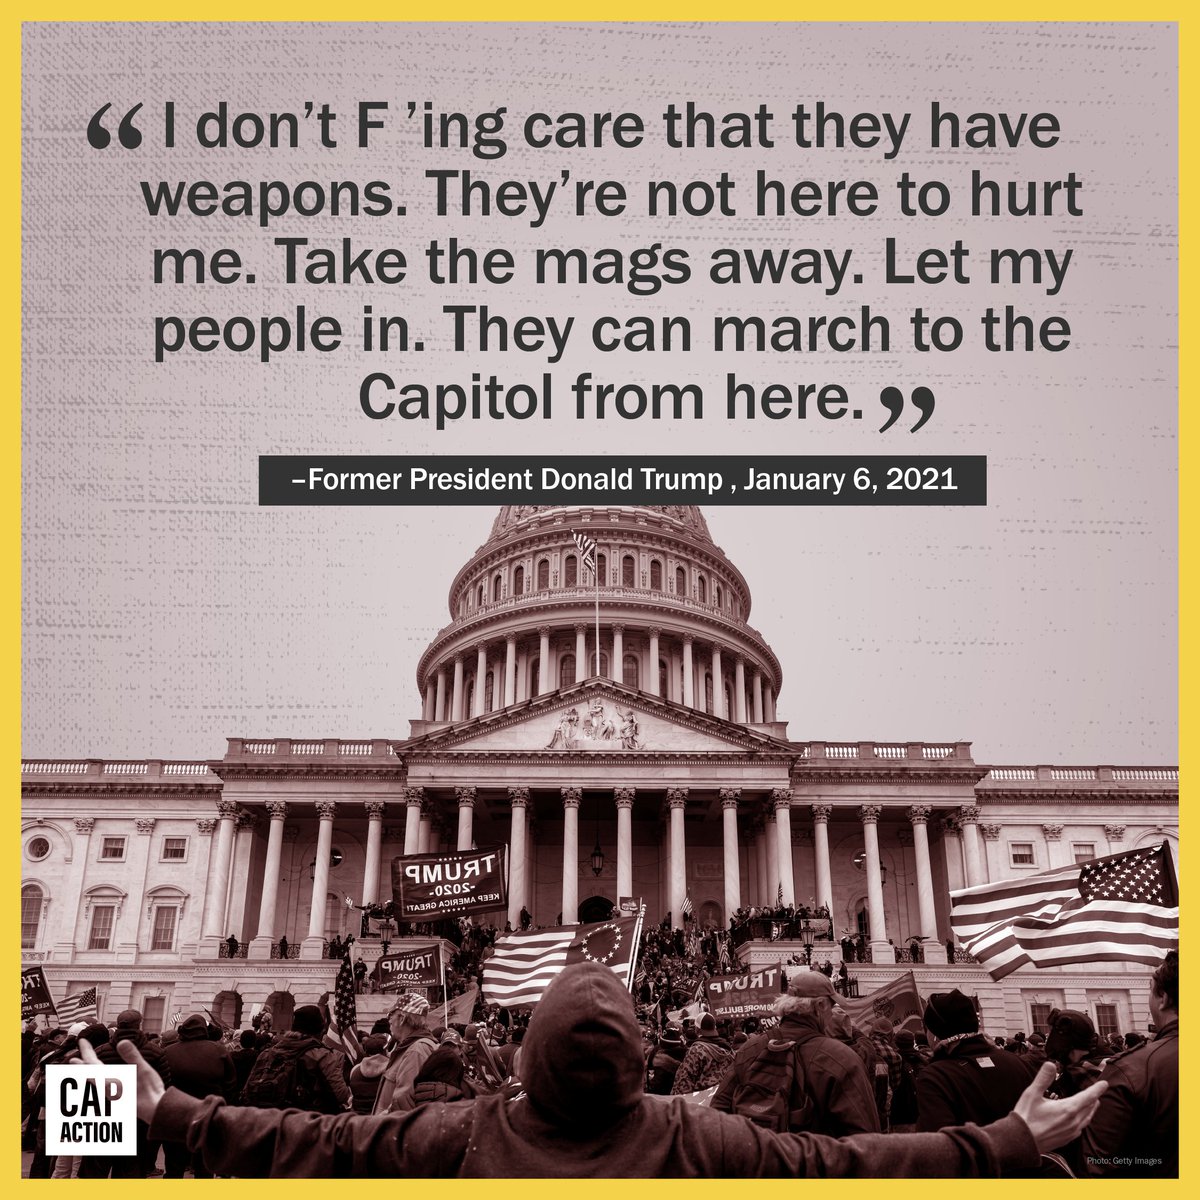 Trump knew his supporters had weapons. He told them to march to the Capitol anyway. All in a desperate attempt to violently overturn the election he lost.